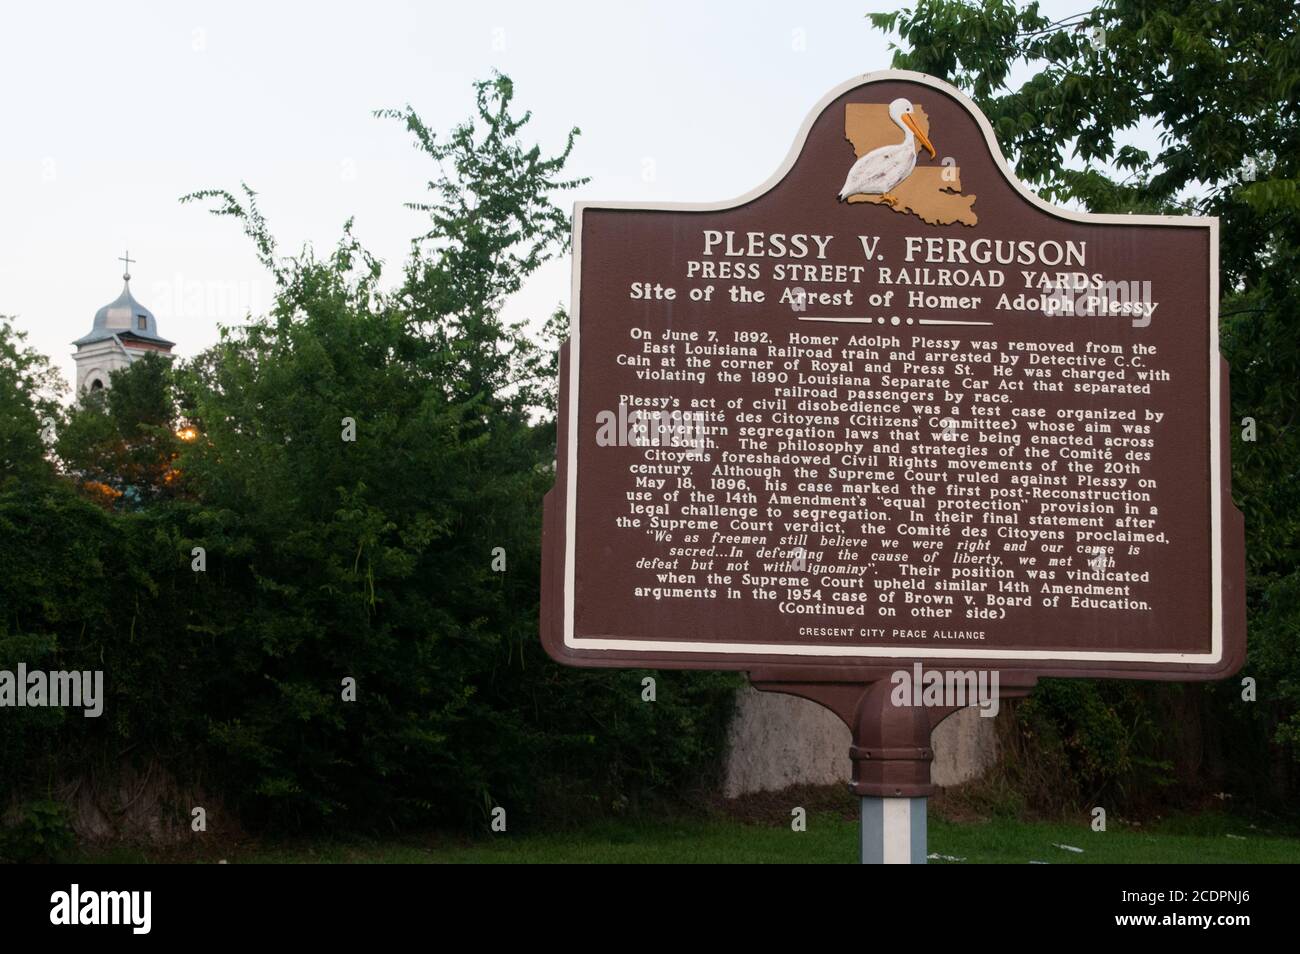 A historical sign marking the arrest site of Homer Adolph Plessy, which became a famous civil rights case, in New Orleans, Louisiana, United States. Stock Photo